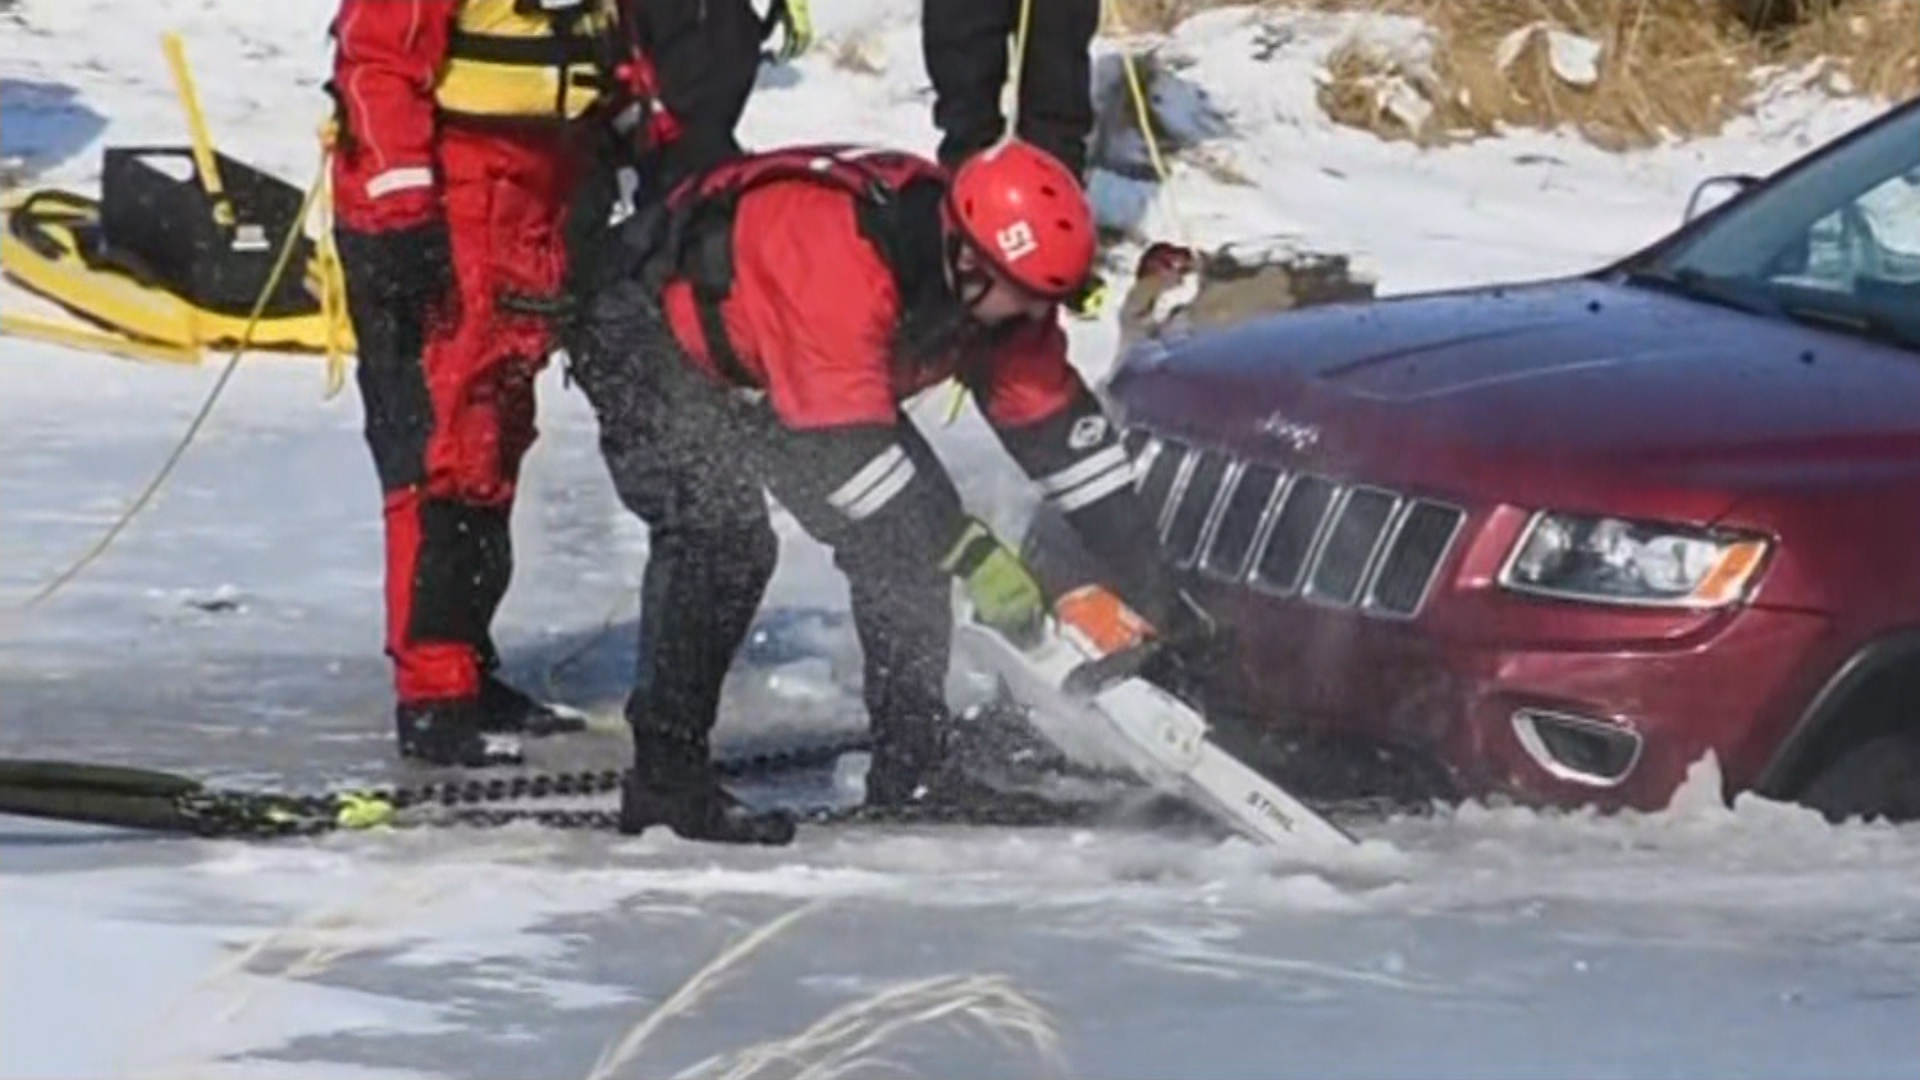 Man Survives After Driving Into Icy Pond On Limerick Township Golf Course In Montgomery County